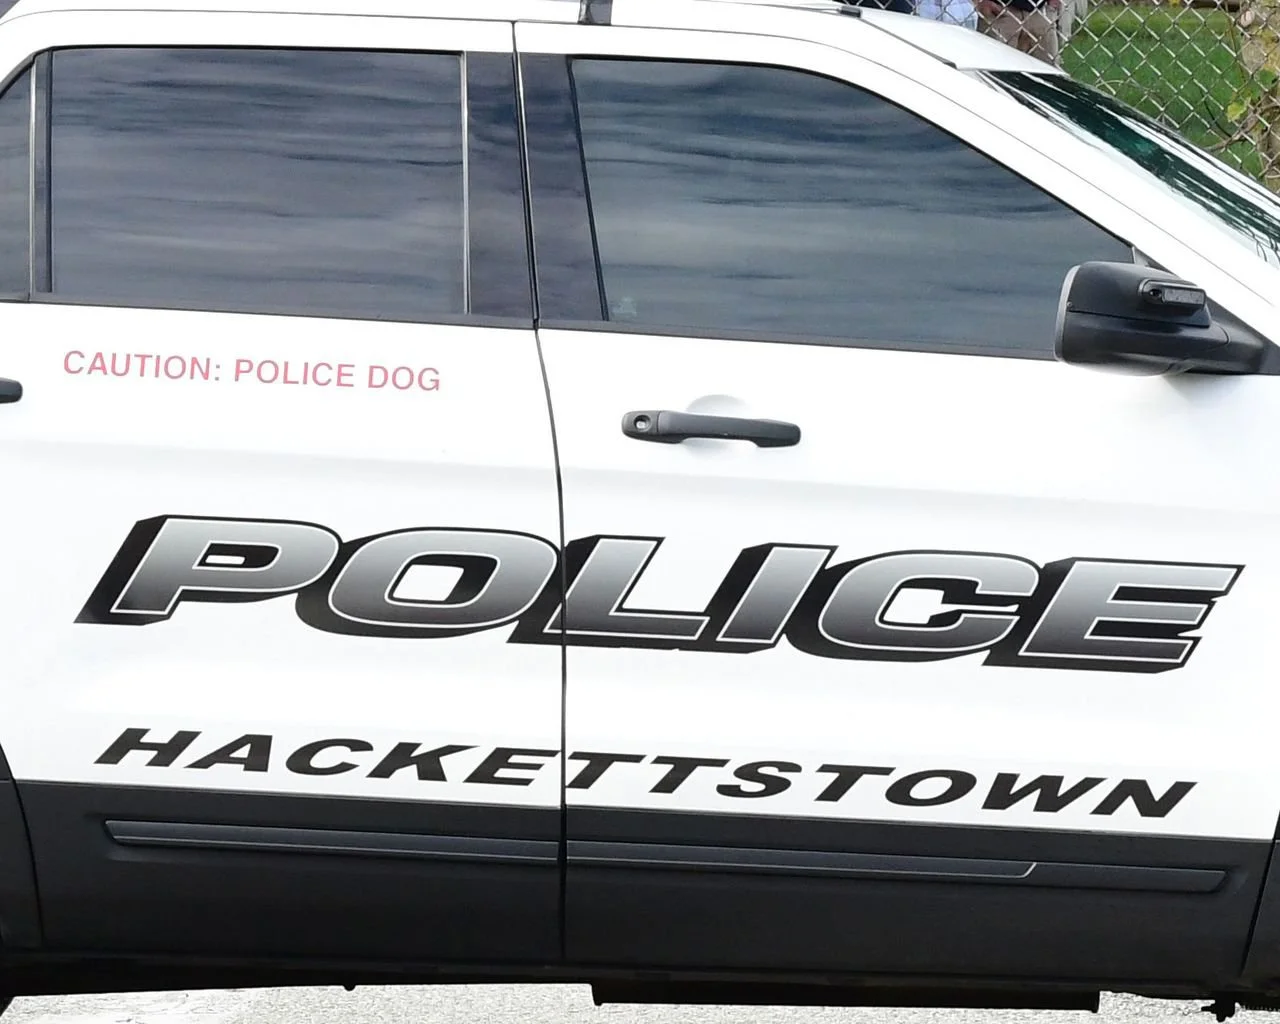 Woman Flown To Hospital With Facial Injuries After Hackettstown Hammer Attack: Police